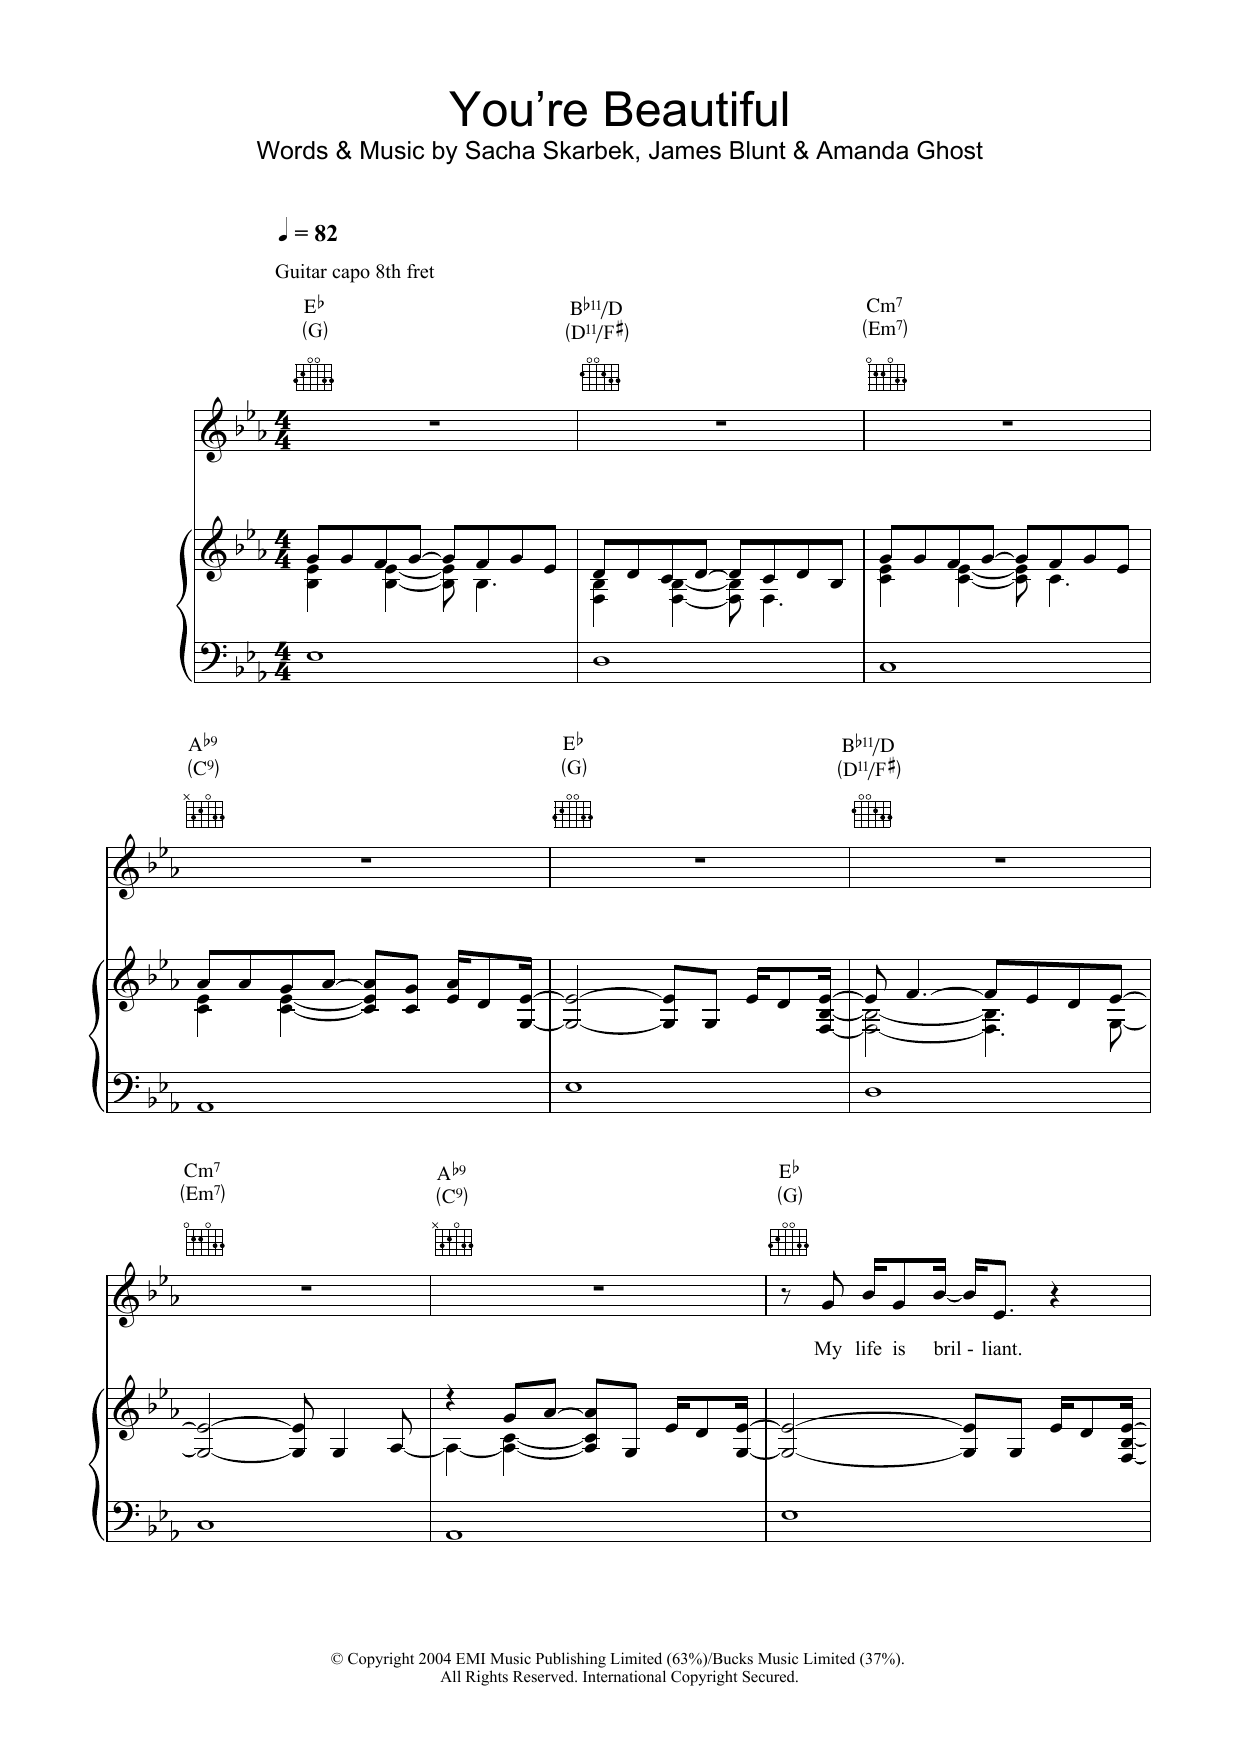 James Blunt You're Beautiful sheet music notes and chords. Download Printable PDF.